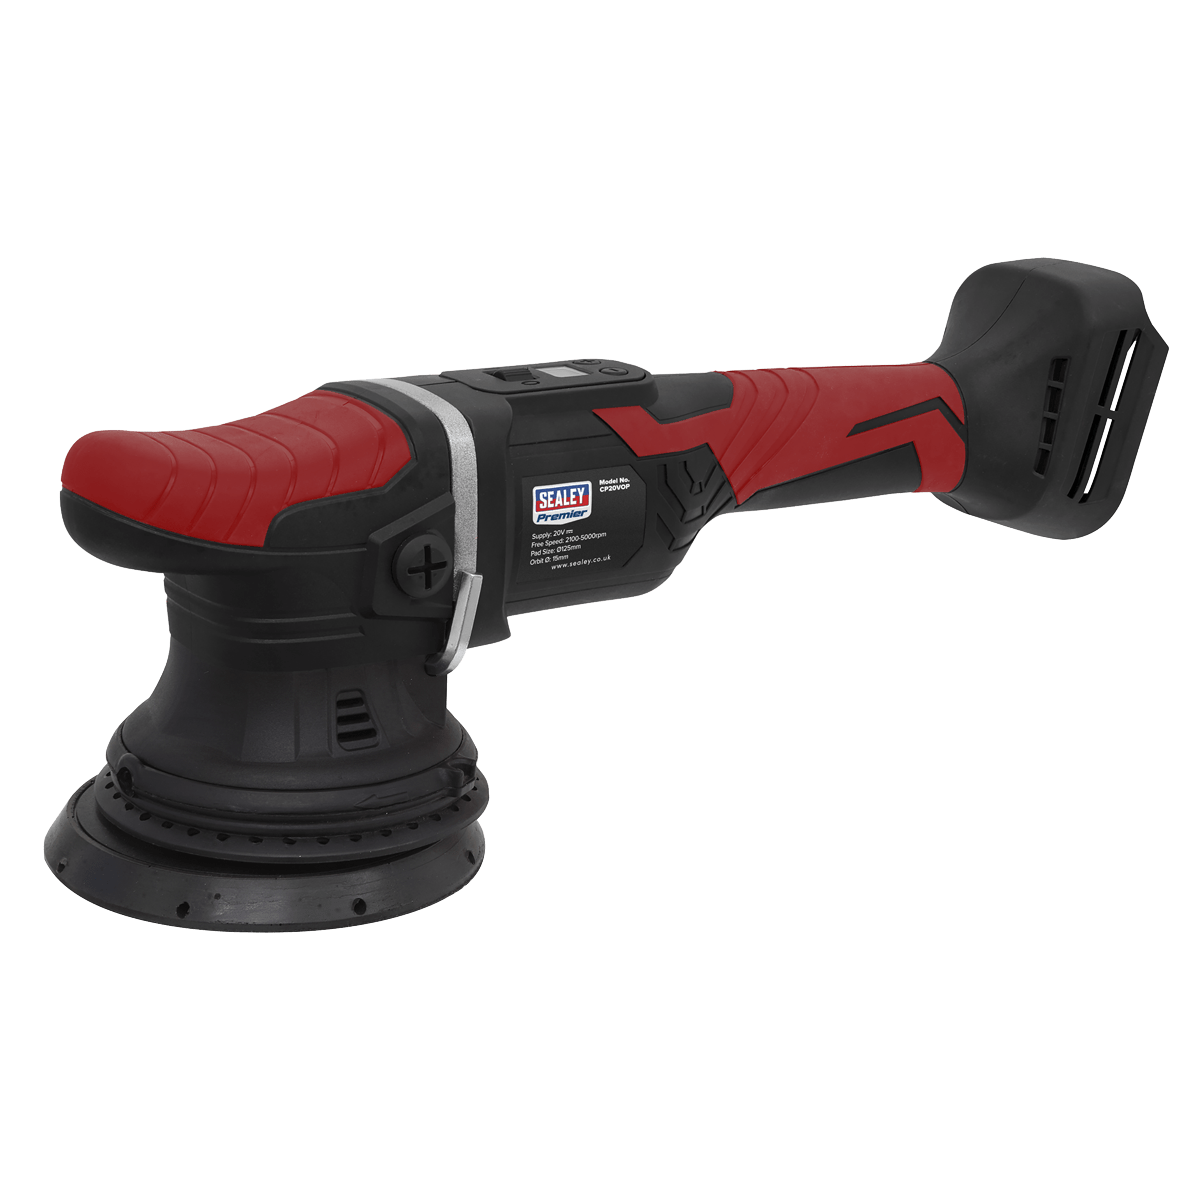 Sealey Cordless Orbital Polisher 125mm 20V SV20 Series Lithium-ion - Body Only CP20VOP